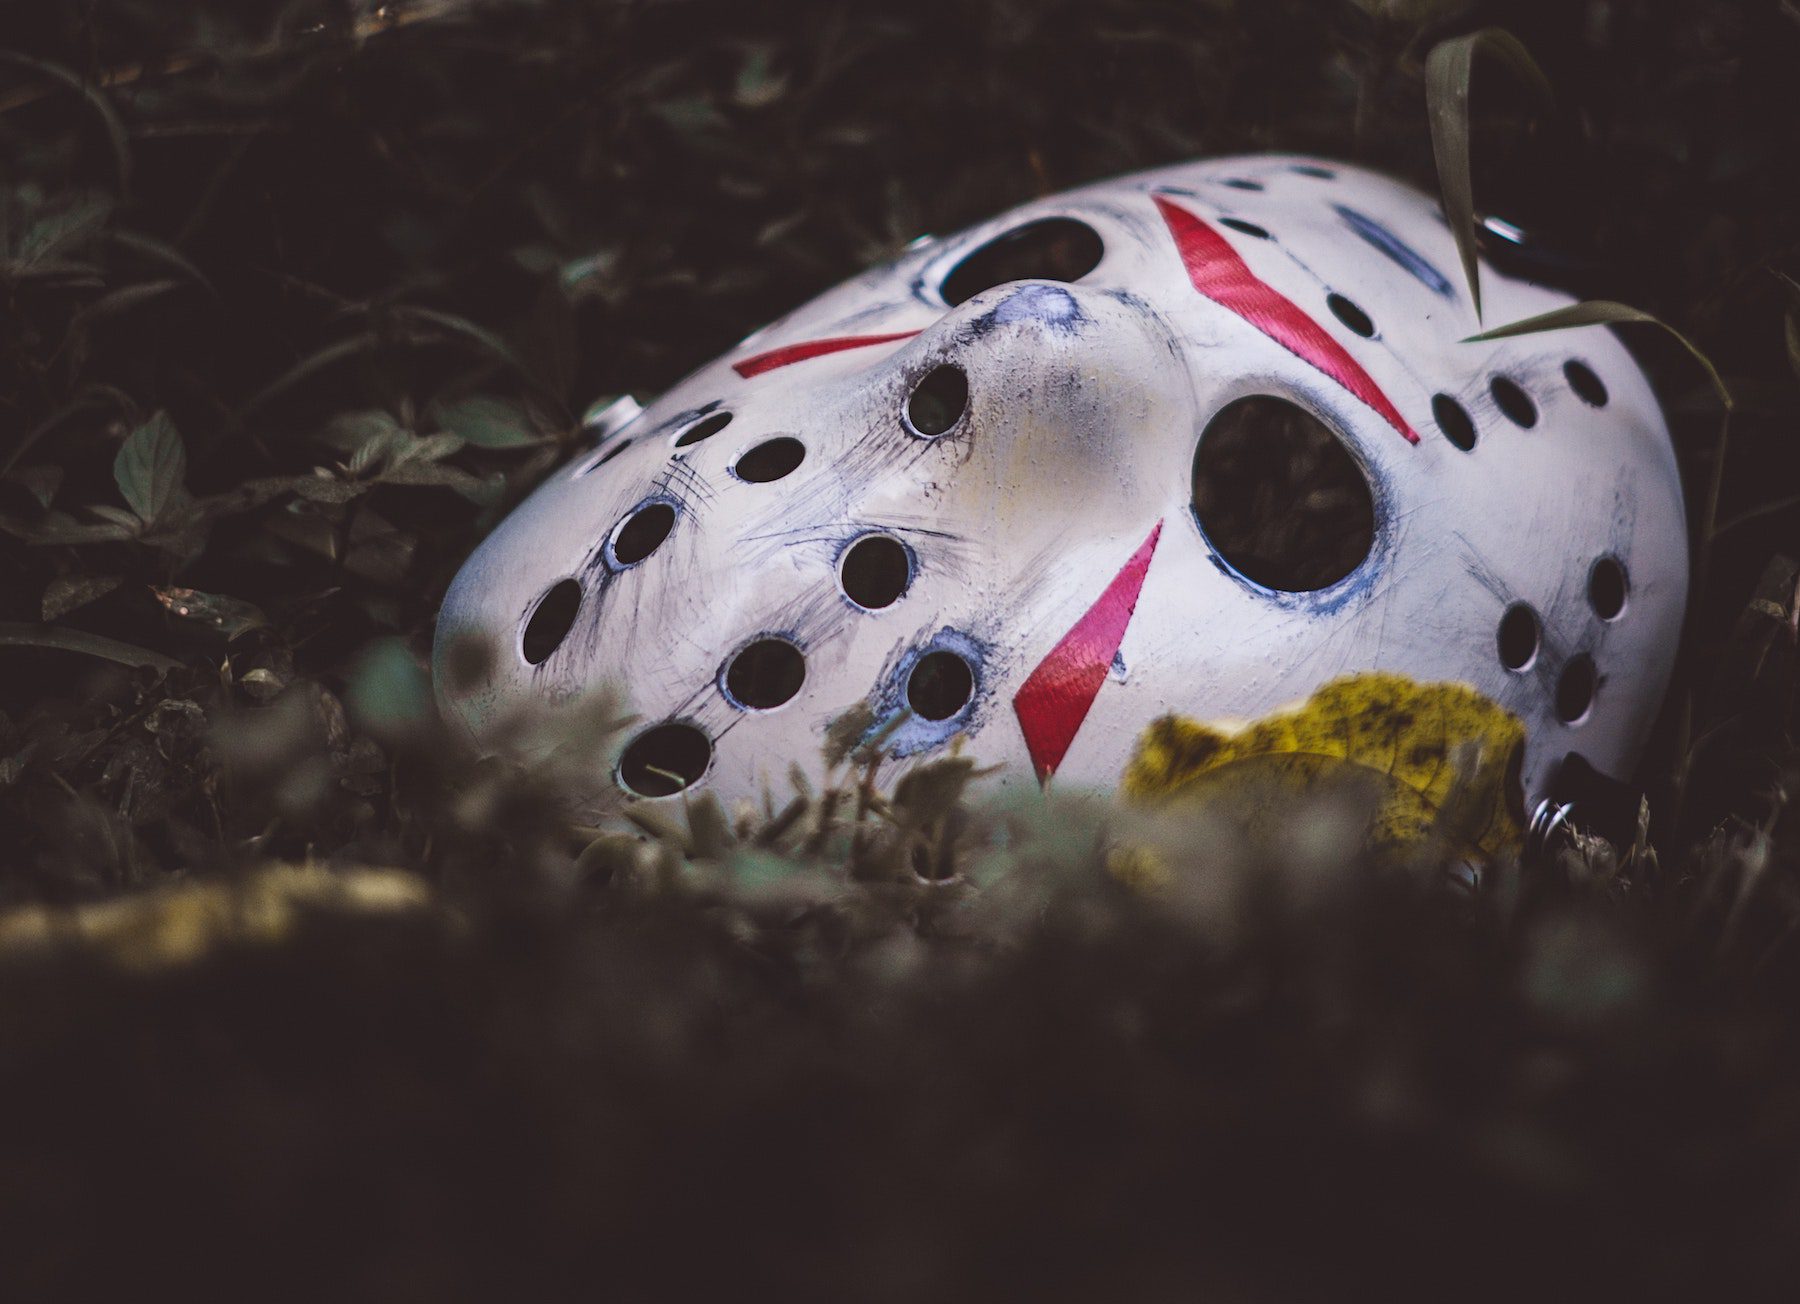 A scuffed and dirty hockey mask similar to that worn by Jason Vorhees, discarded among some leaves.